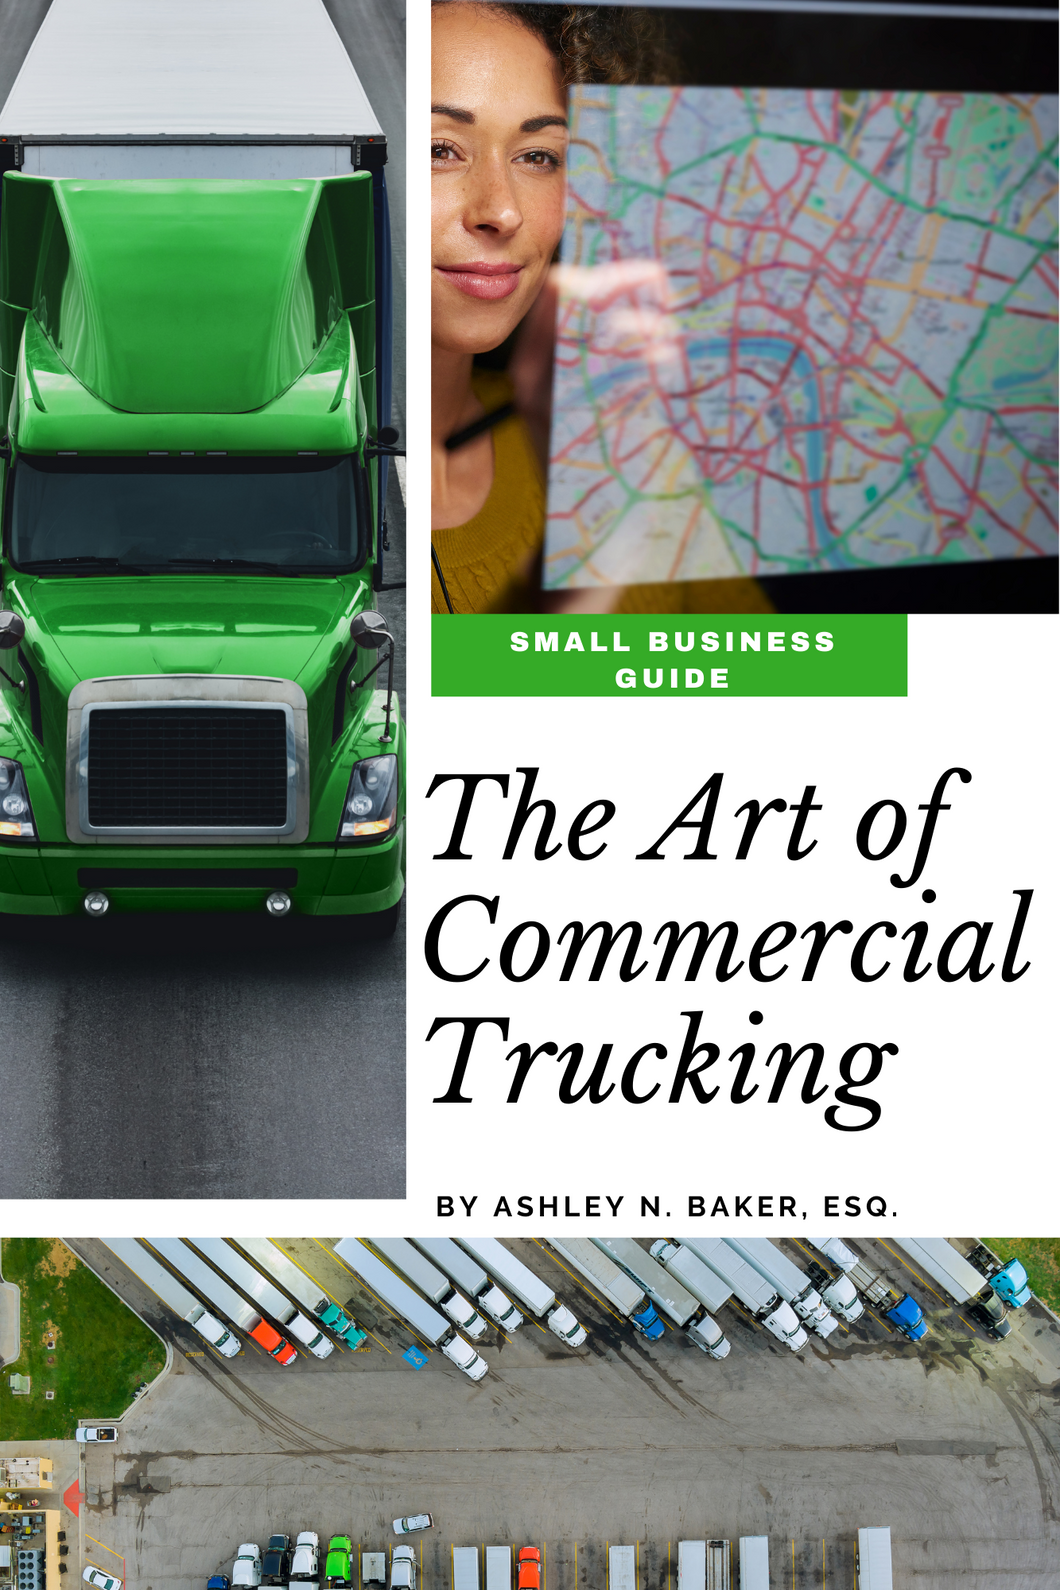 The Art of Commercial Trucking: Small Business Guide